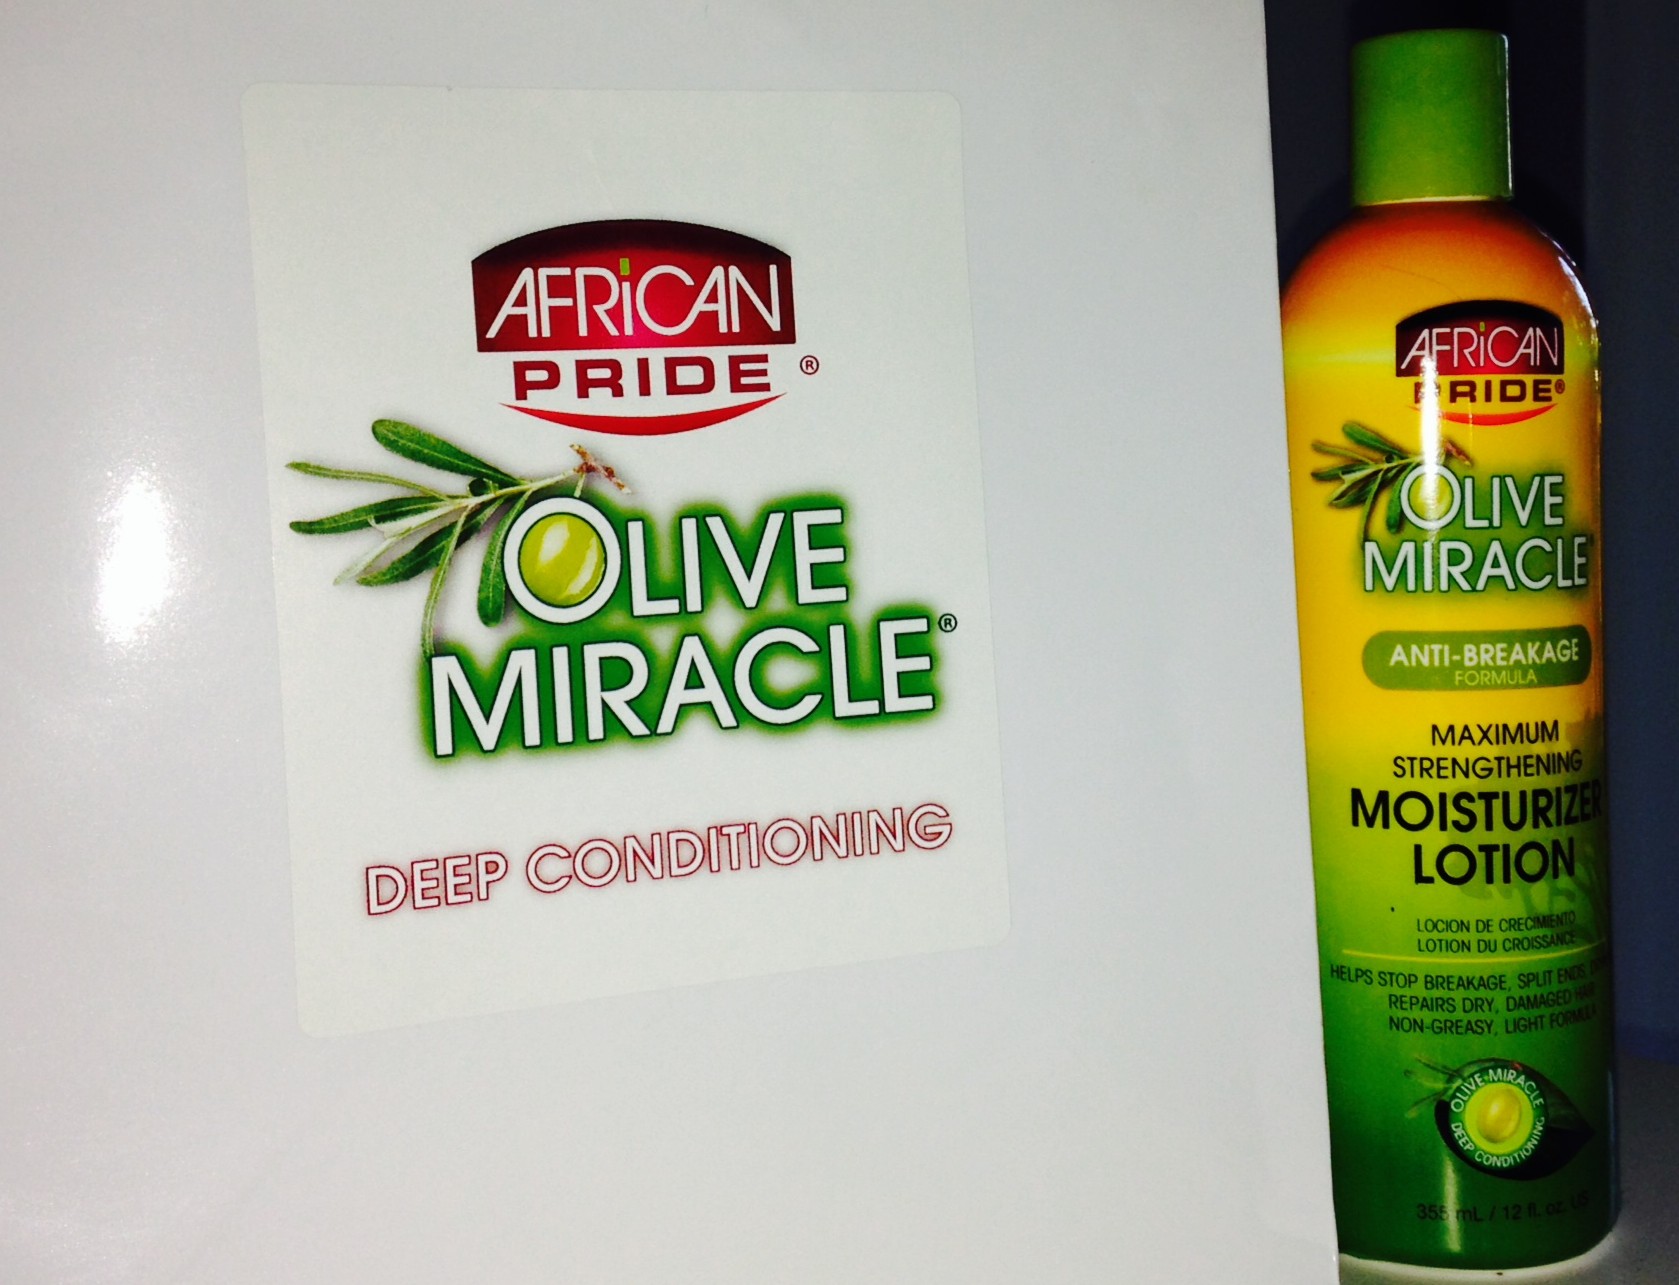 African Pride Olive Miracle Anti-Breakage Formula for TheBobbyPen.com